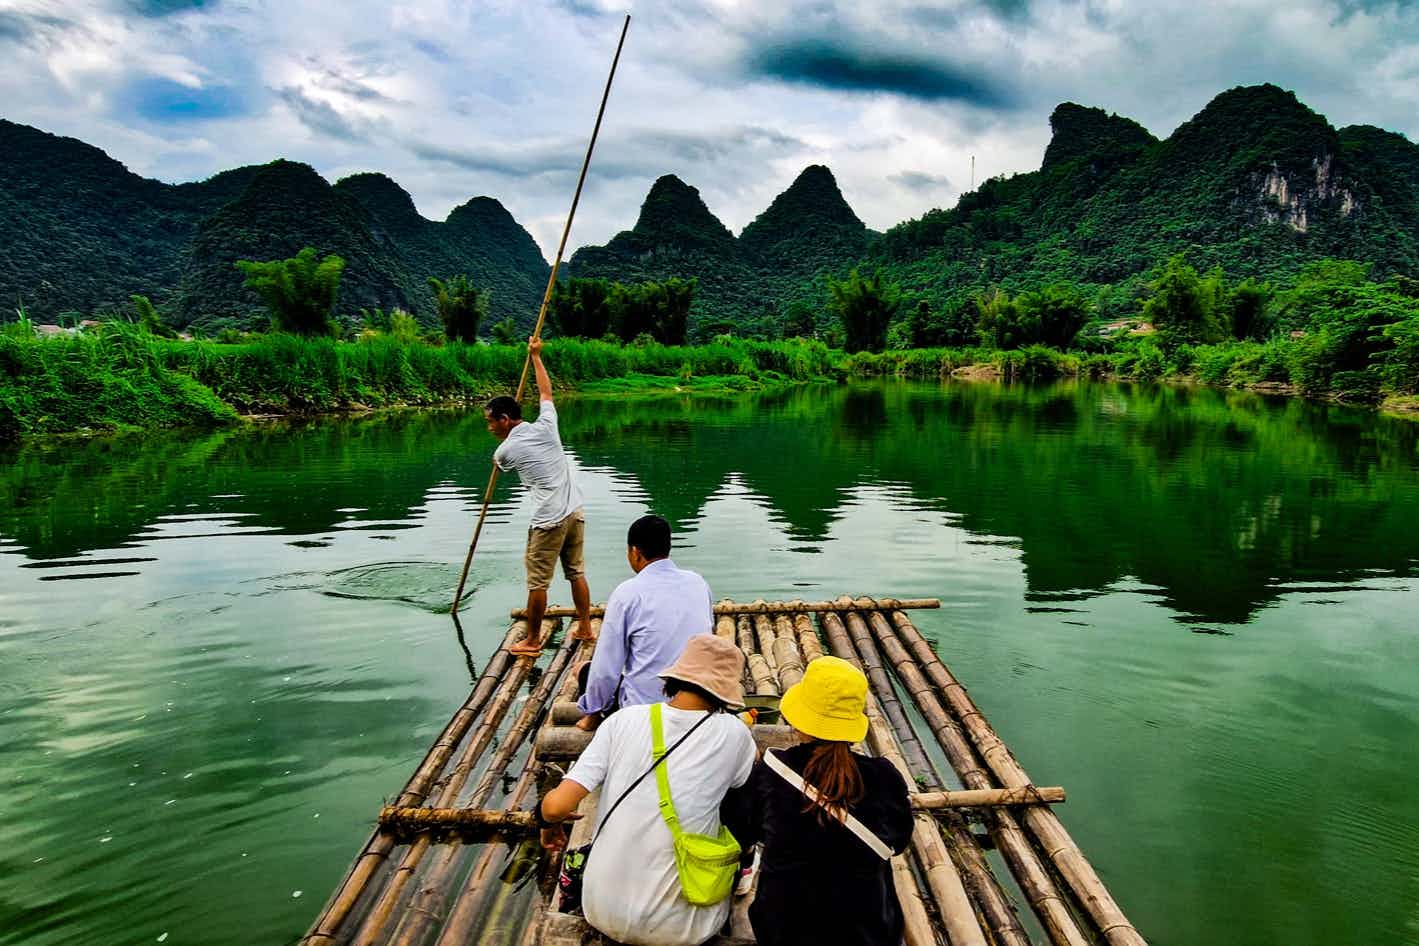 Bamboo raft on the Bac Vong River, Vietnam. Photo: Host/Easia Active
